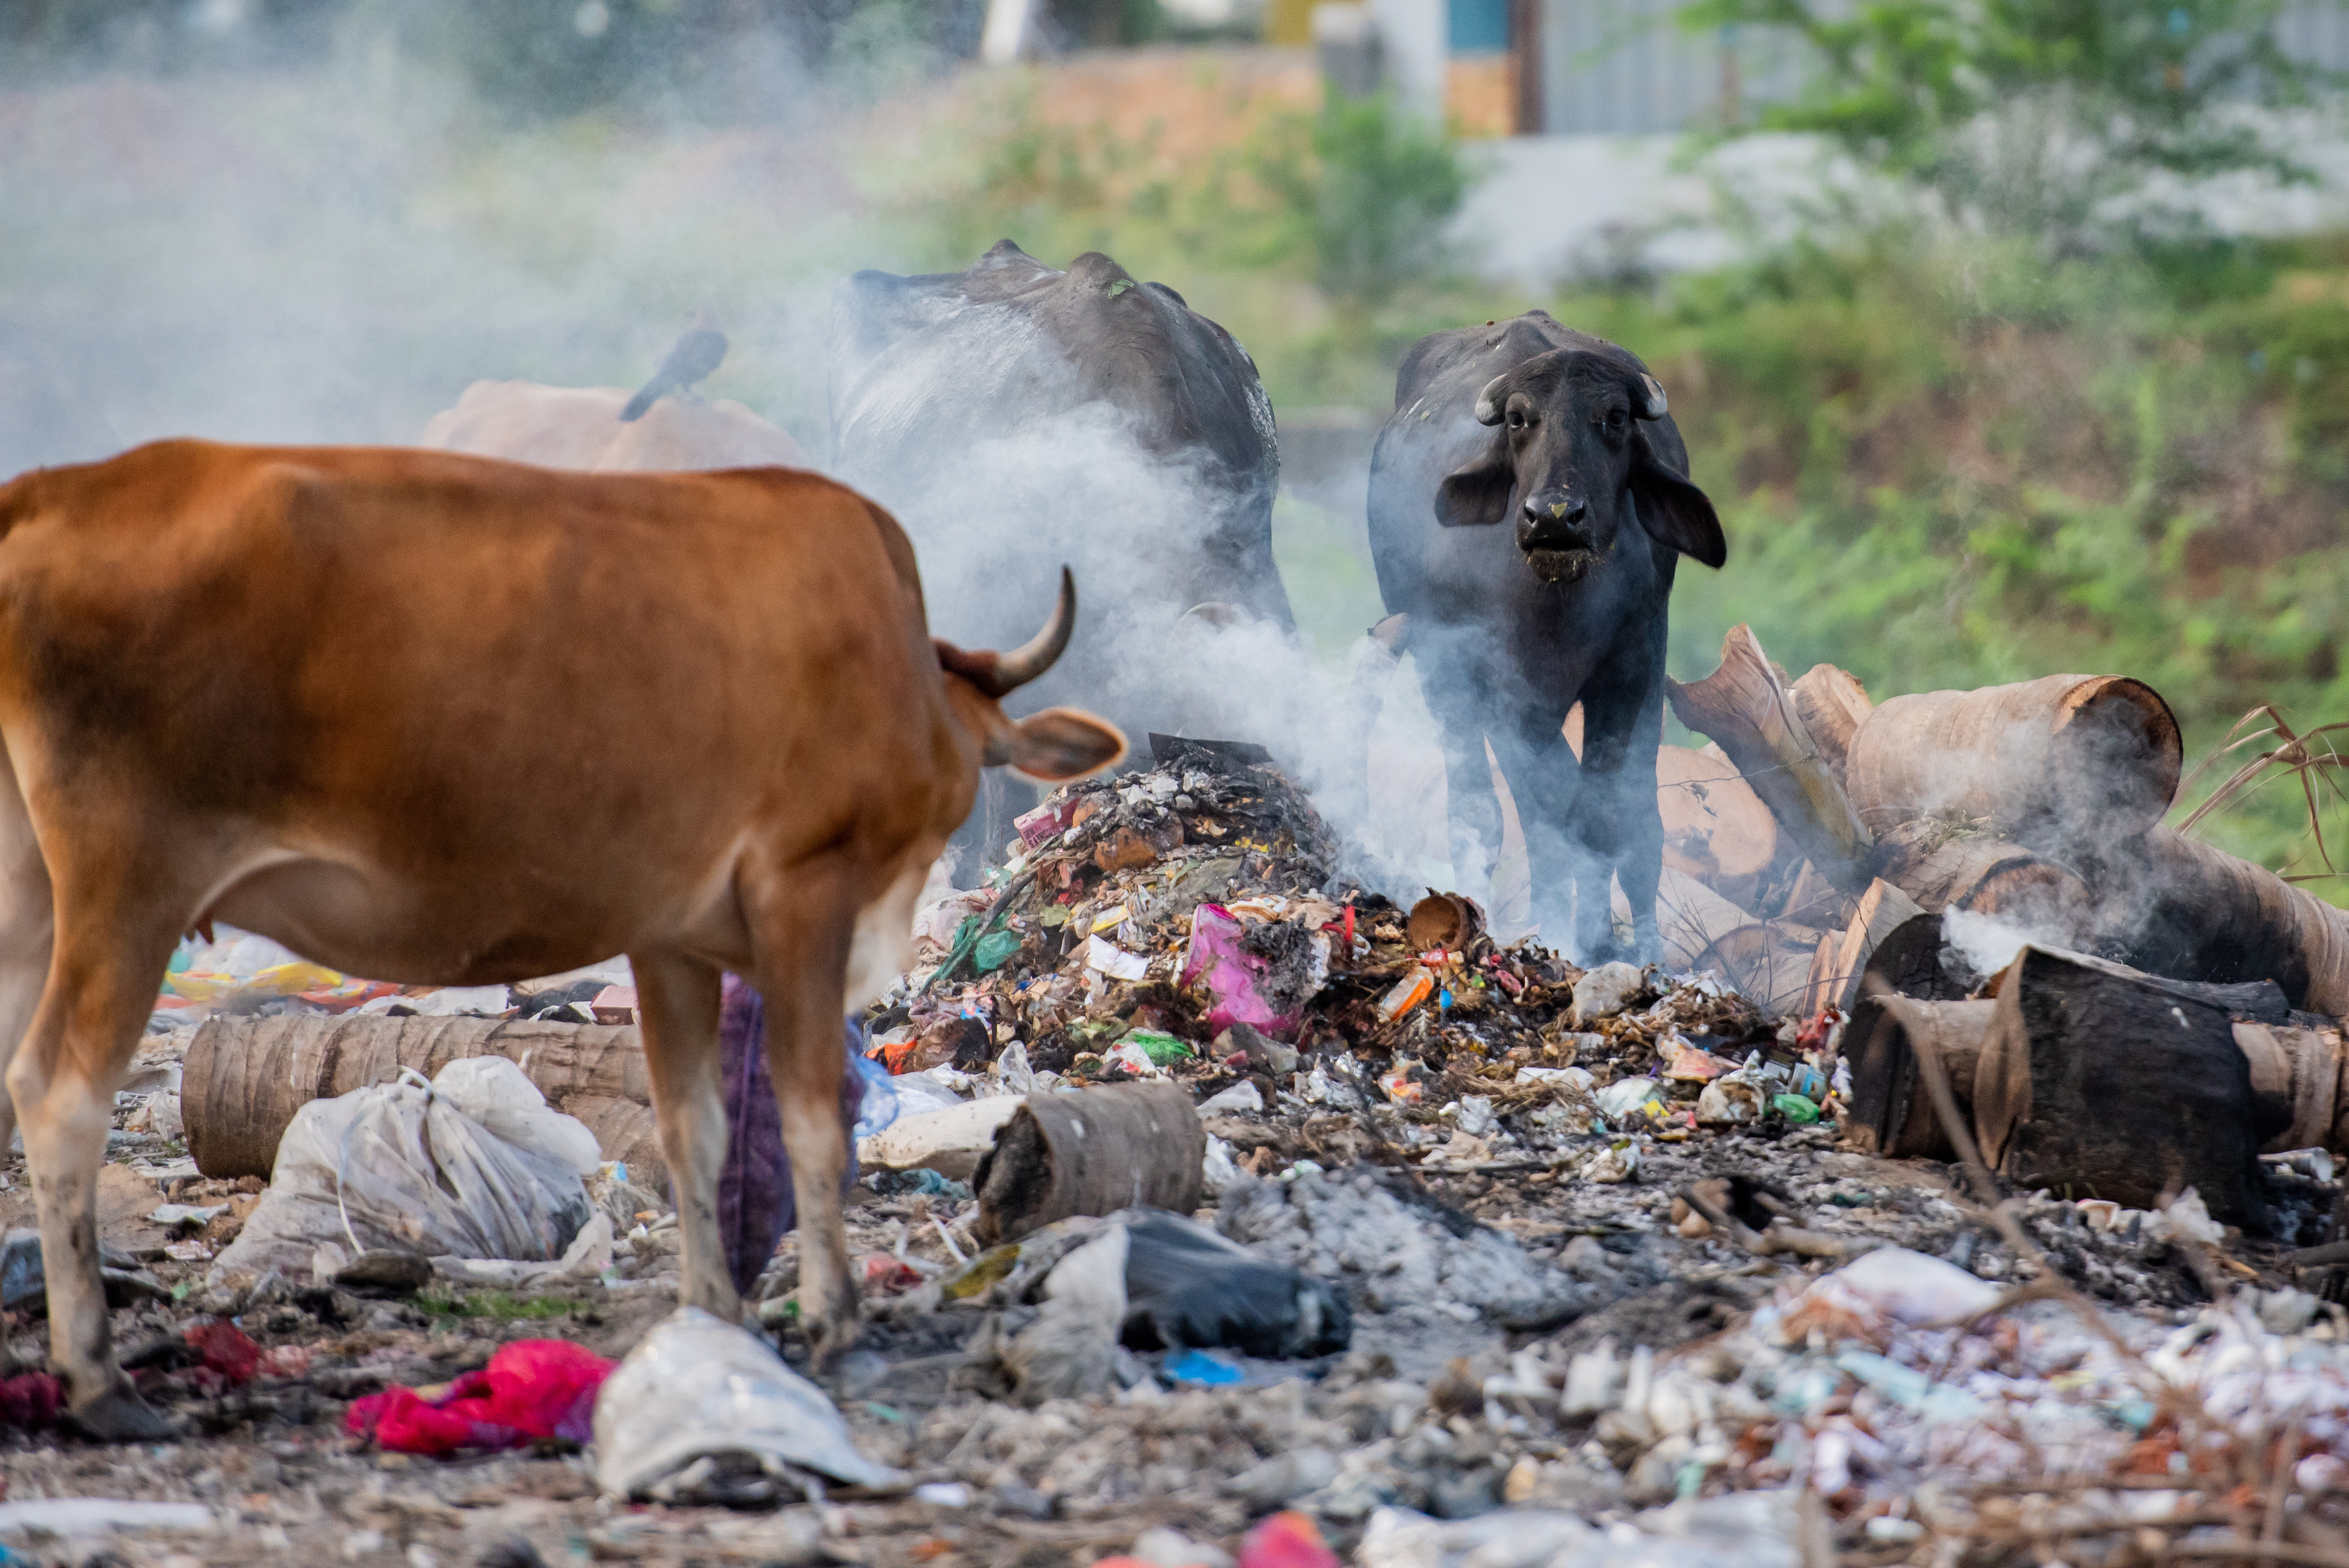 Cows and water buffalo in the middle of a city, eating trash.